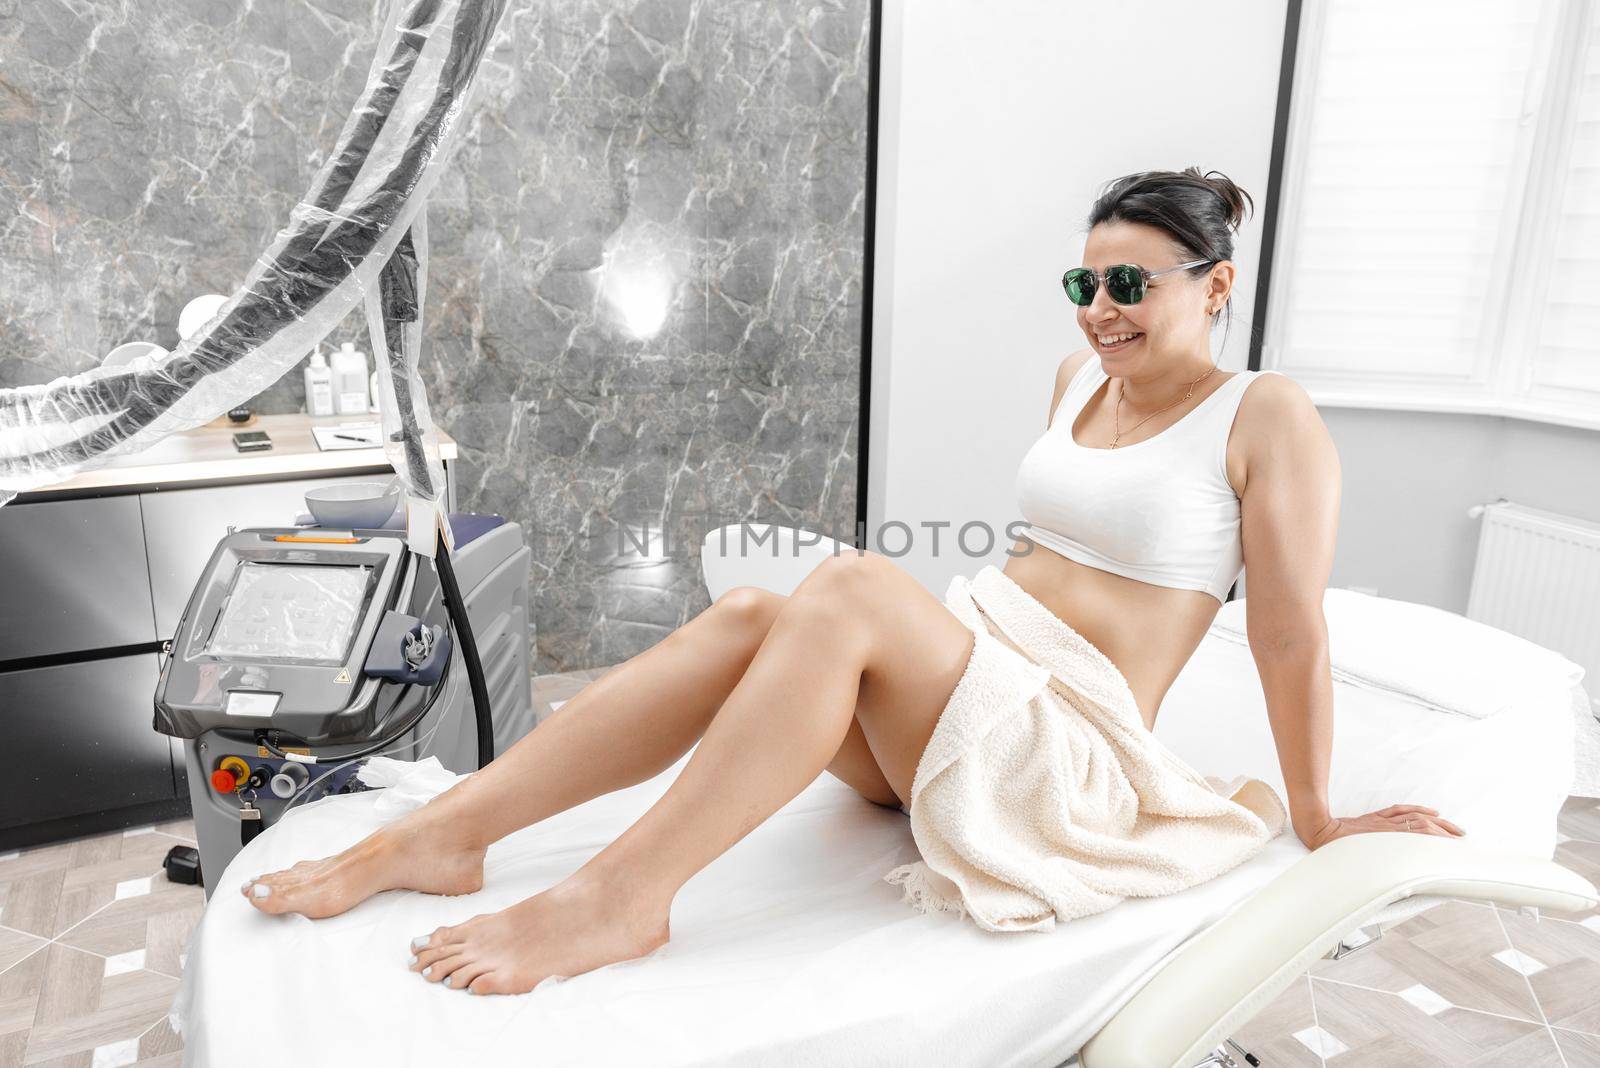 Laser hair removal and cosmetology in a beauty salon. Hair removal procedure. cosmetology, spa and hair removal concept. Beautiful woman removes hair on her legs by gulyaevstudio